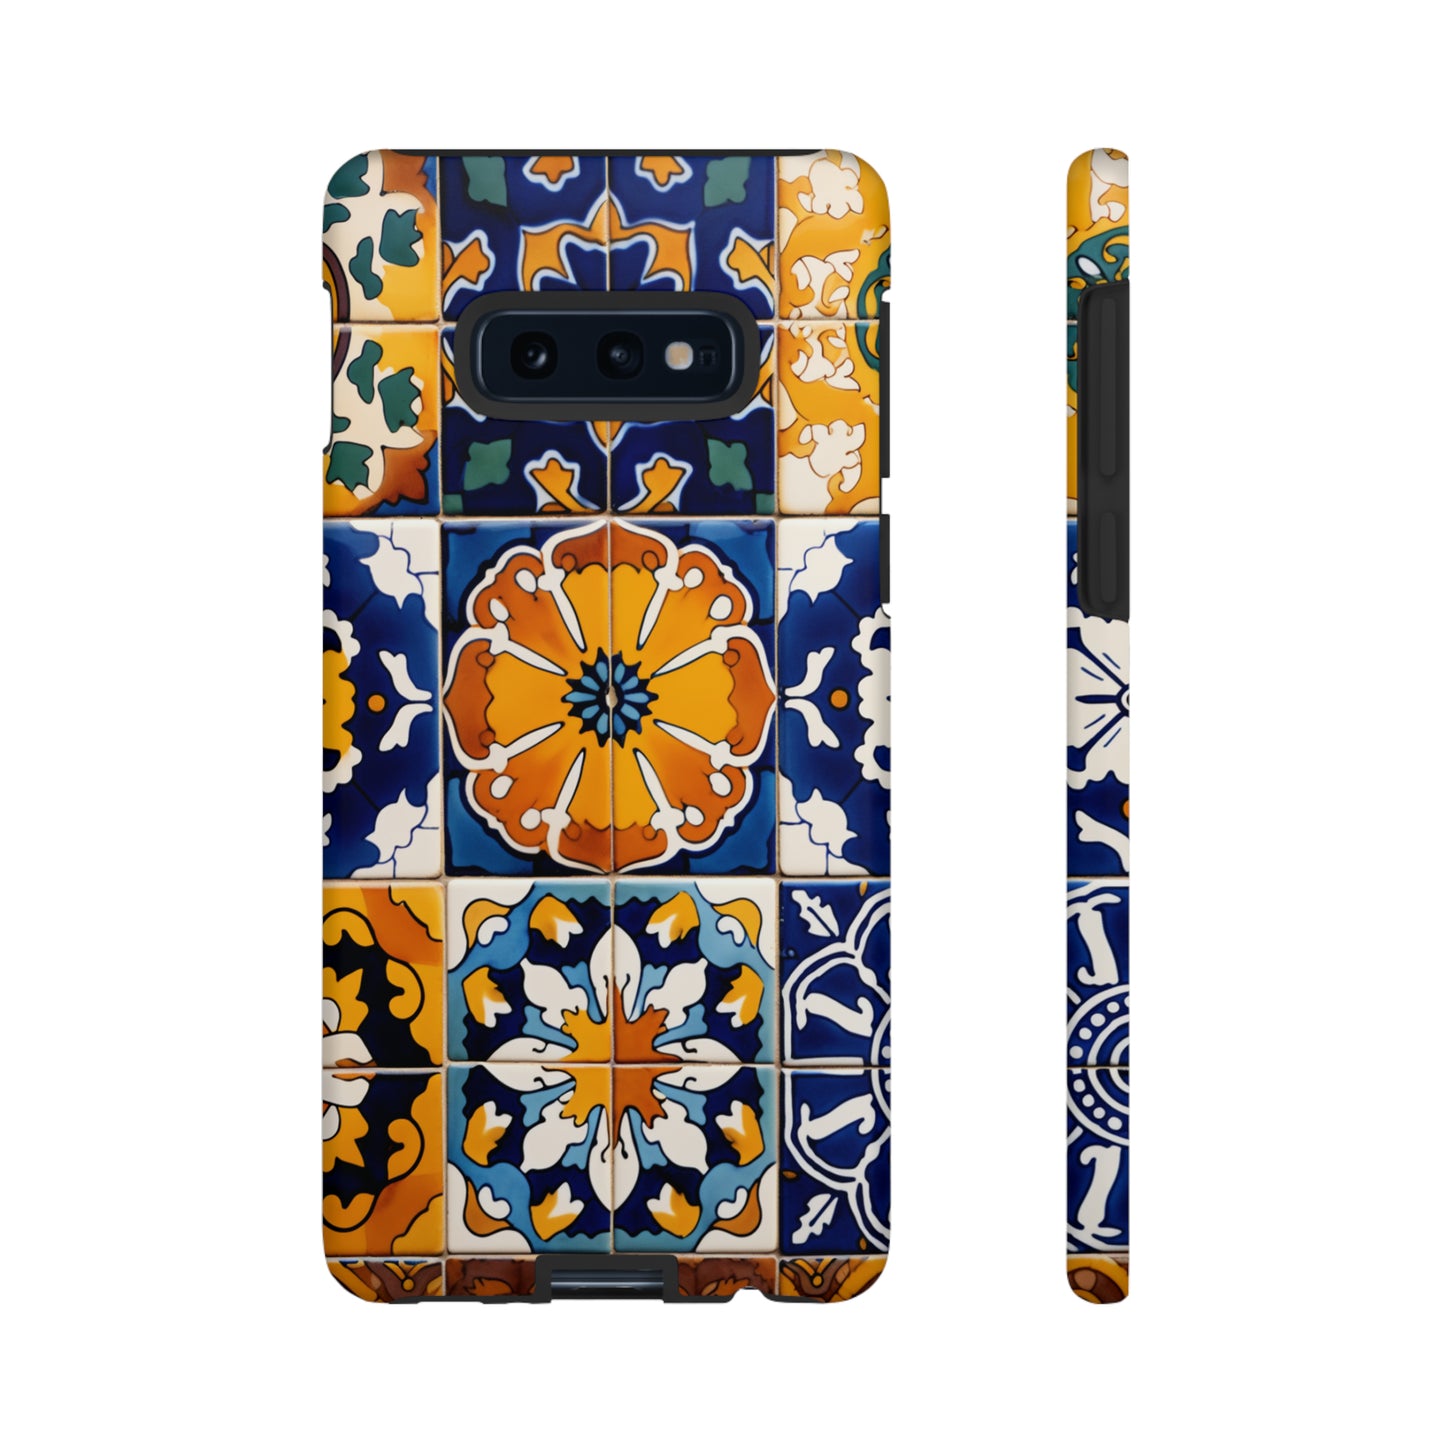 Mexican tile motif phone case for Samsung and Google devices